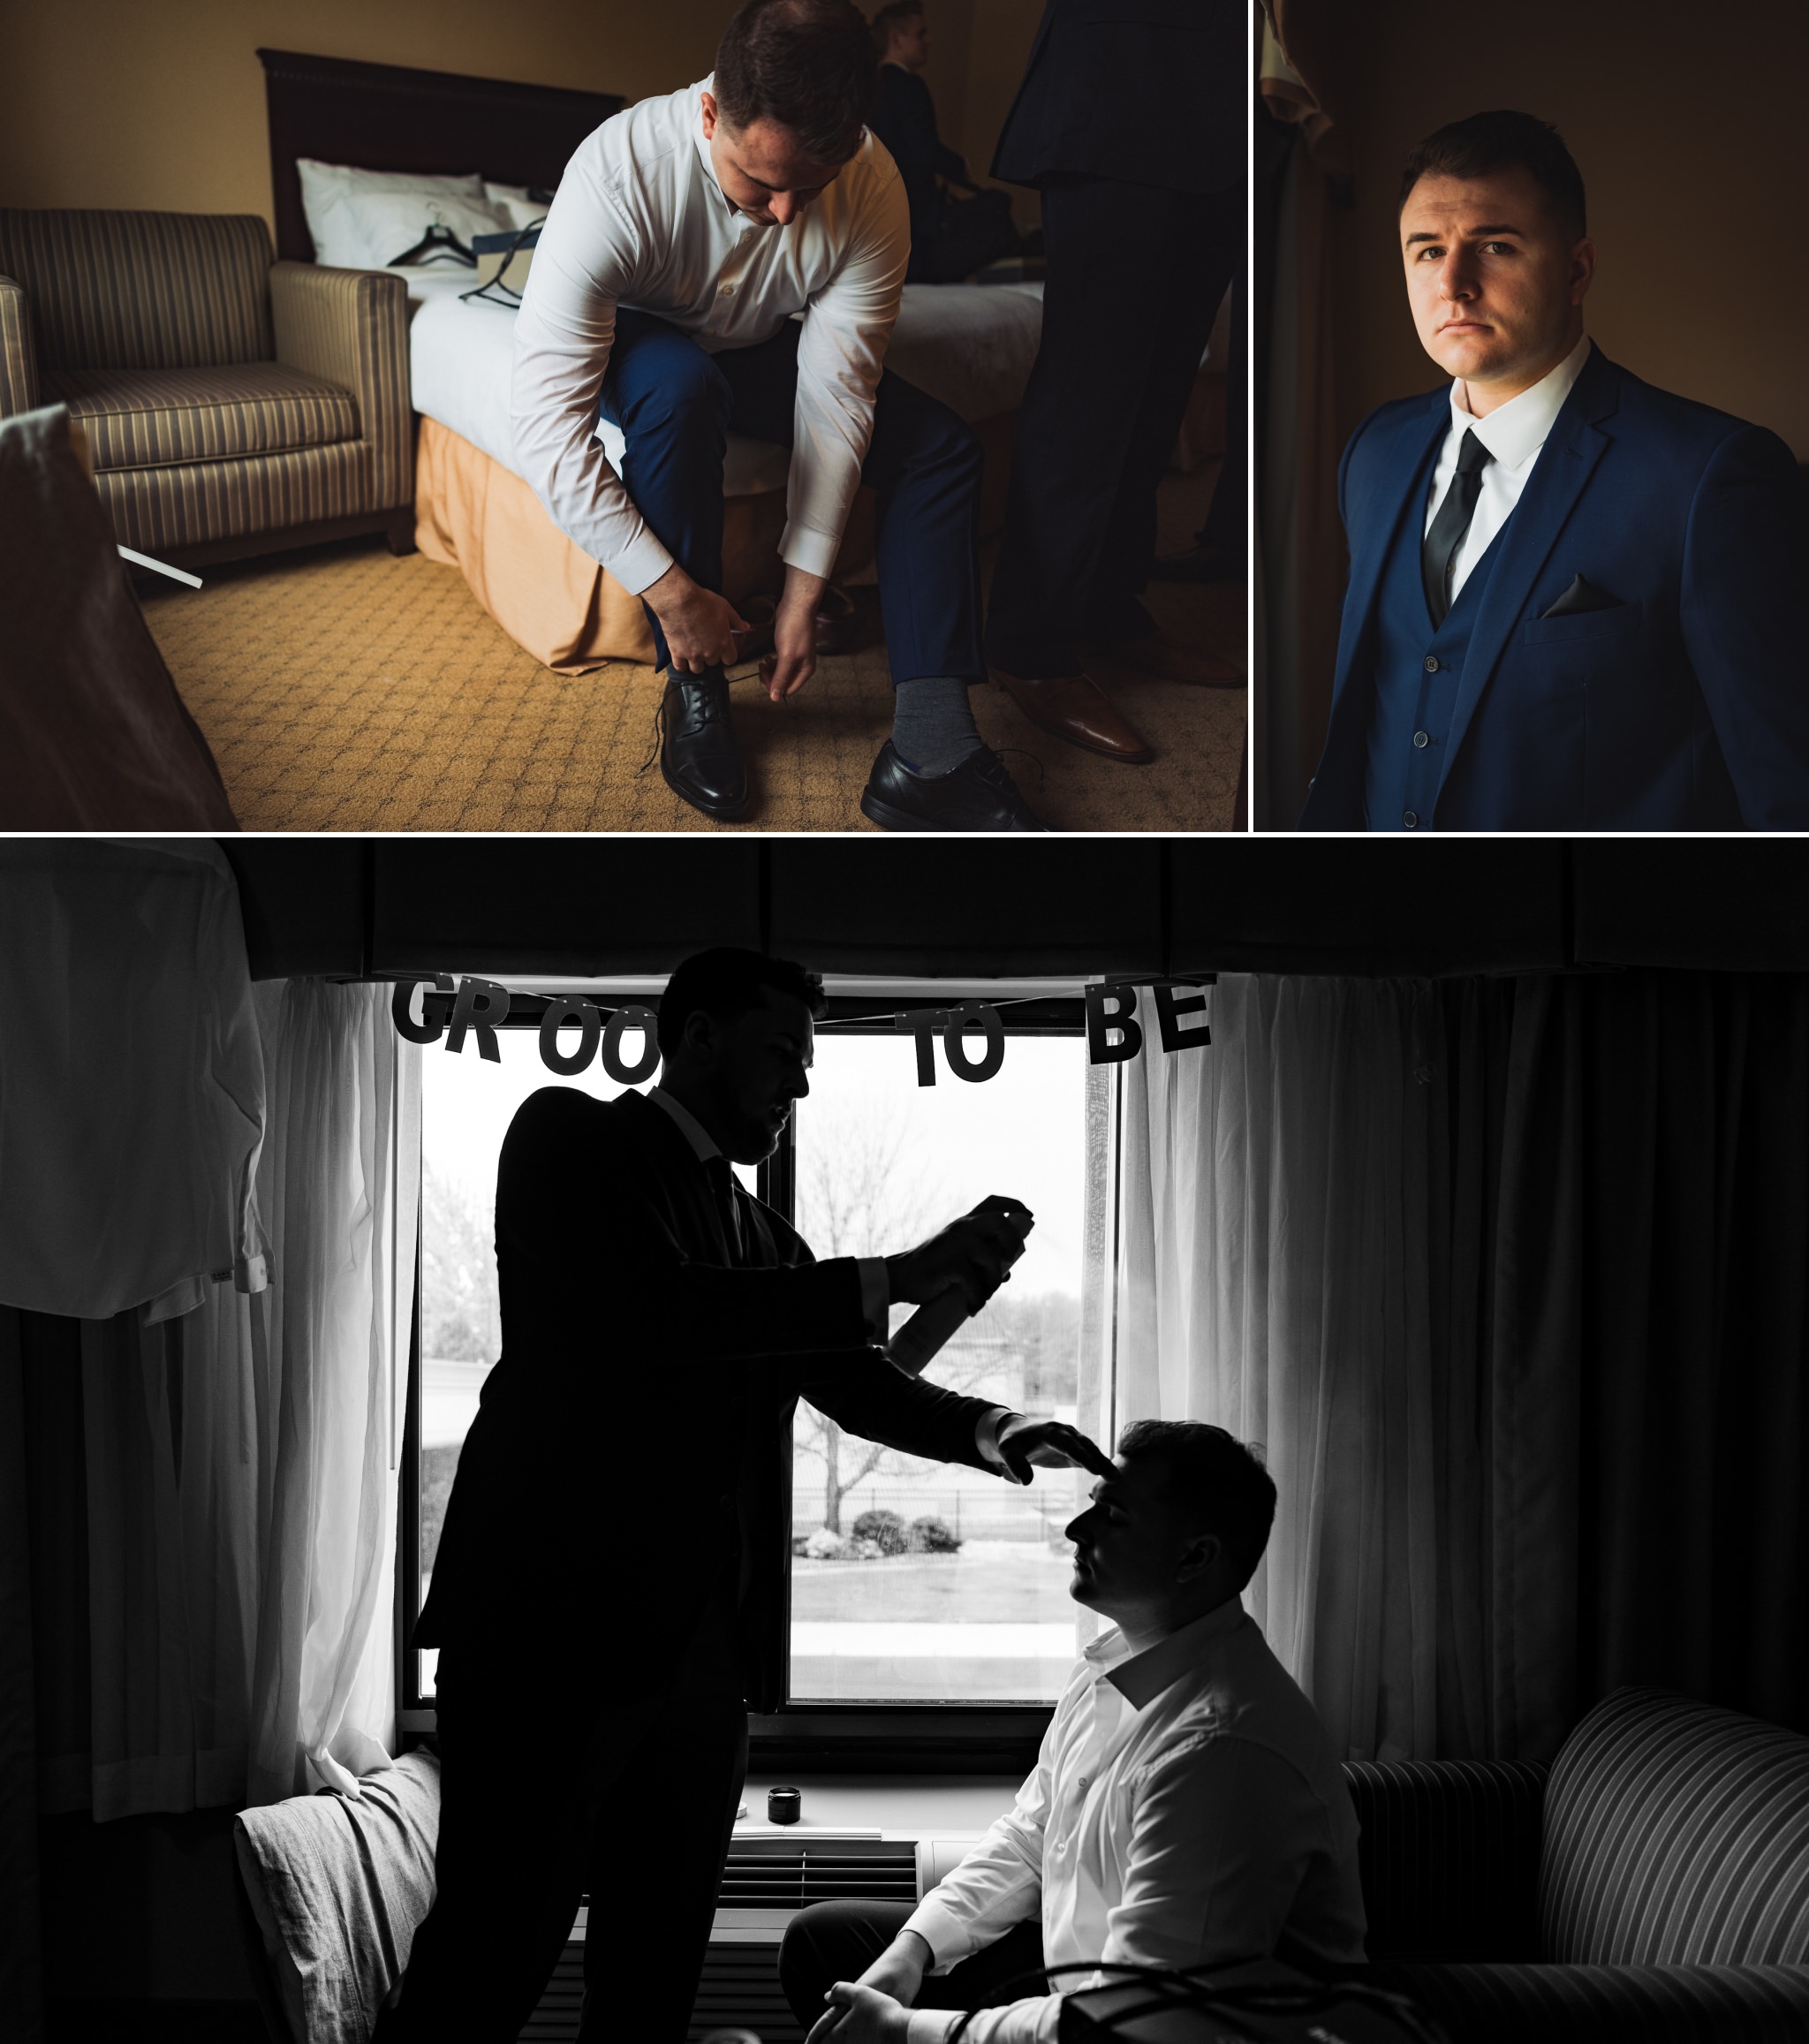  when photographing grooms getting ready, I like to position then next to a large light source, to provide optimal light. I also like the way the light falls off, creating a little moodier of a portrait when photographing weddings. 

Photos taken dur